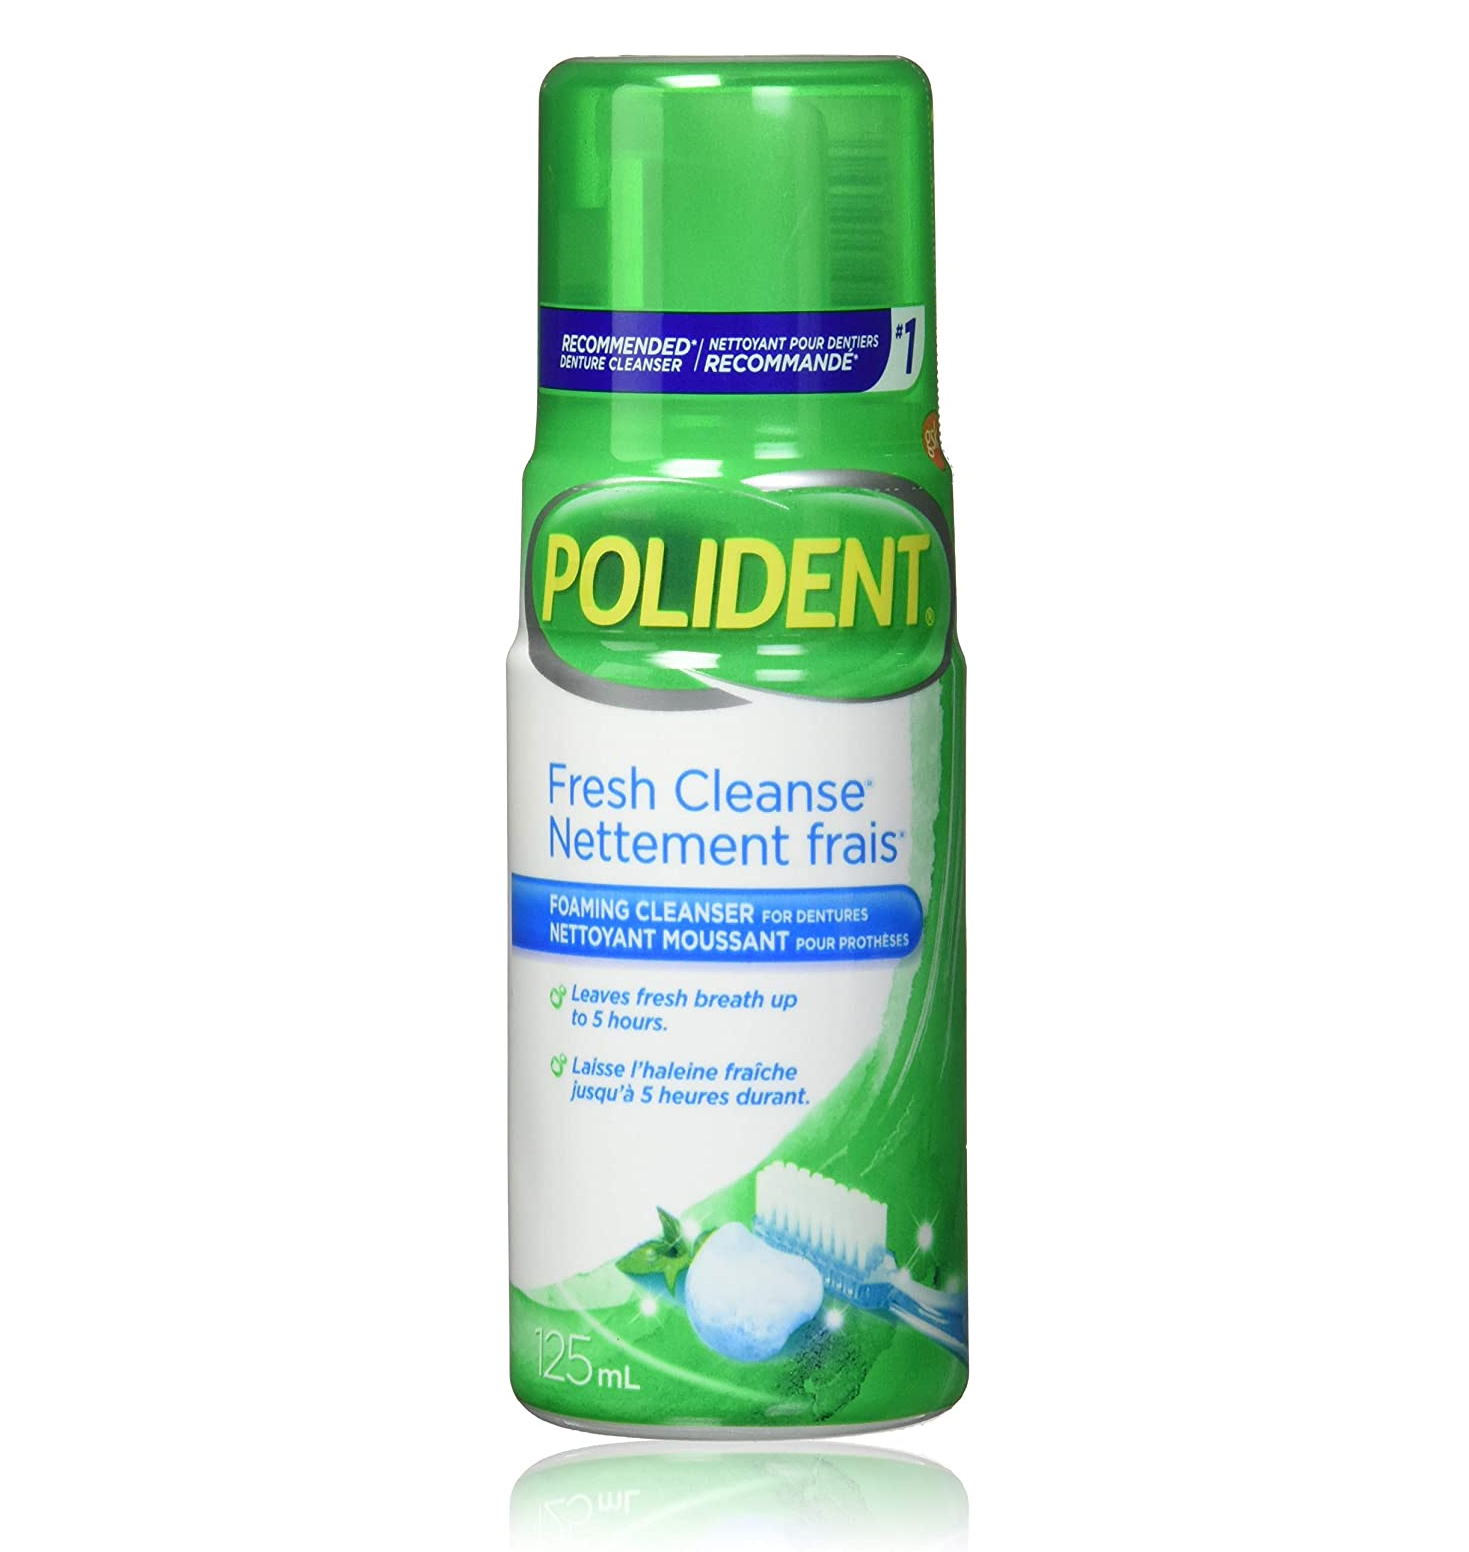 Polident Fresh Cleanse Foaming Cleanser 125mL